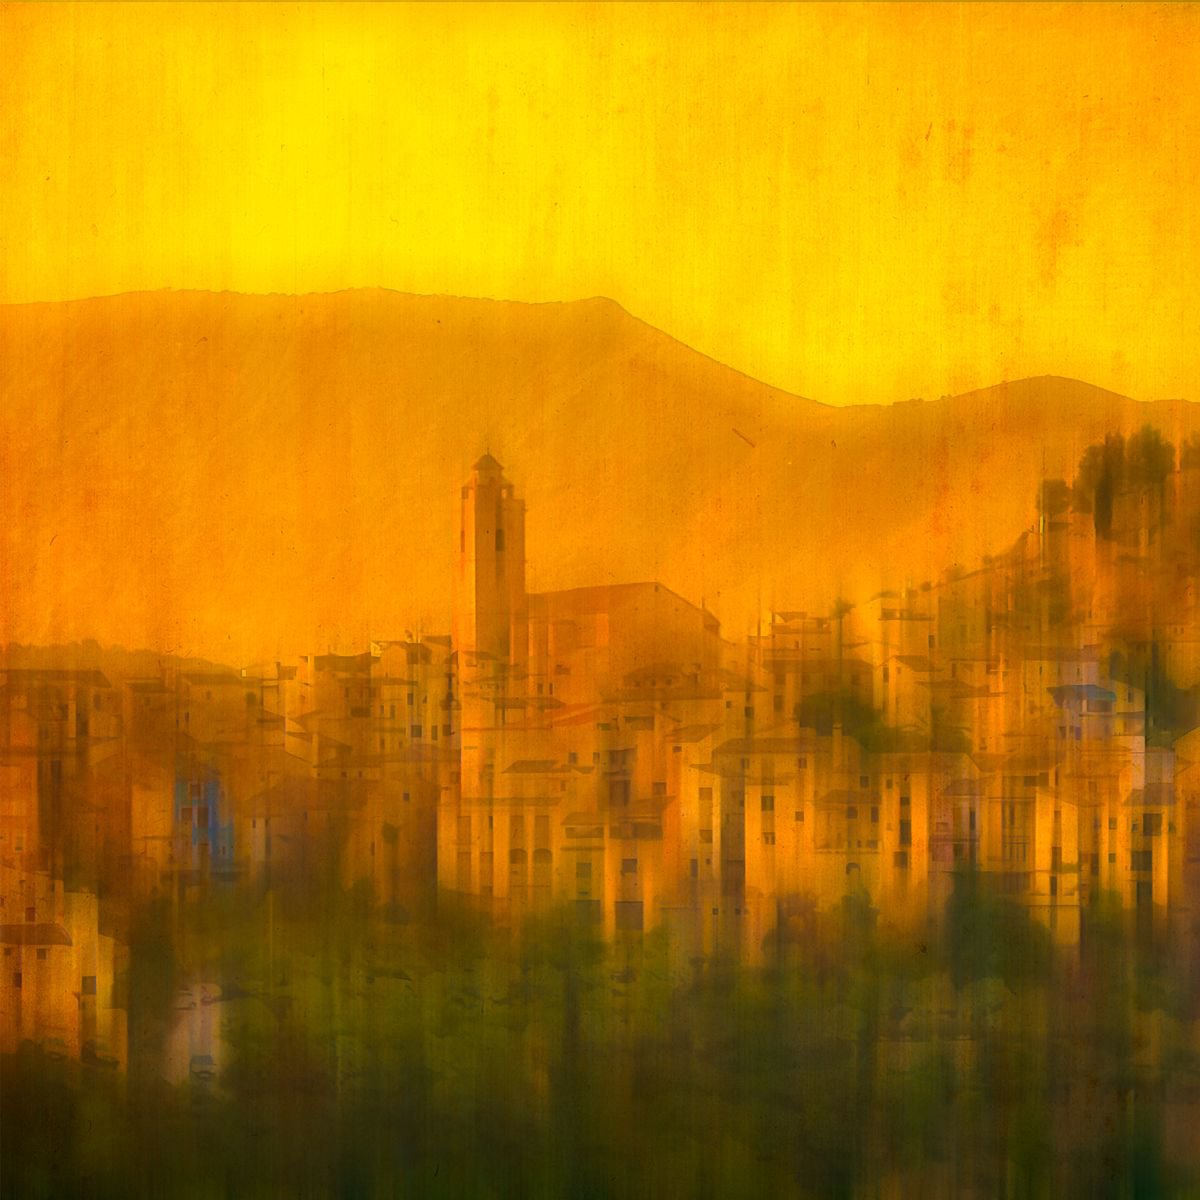 Hilltop Mountain Village #1 Limited Edition 1/50 10x10 inch Photographic Print. by Graham Briggs